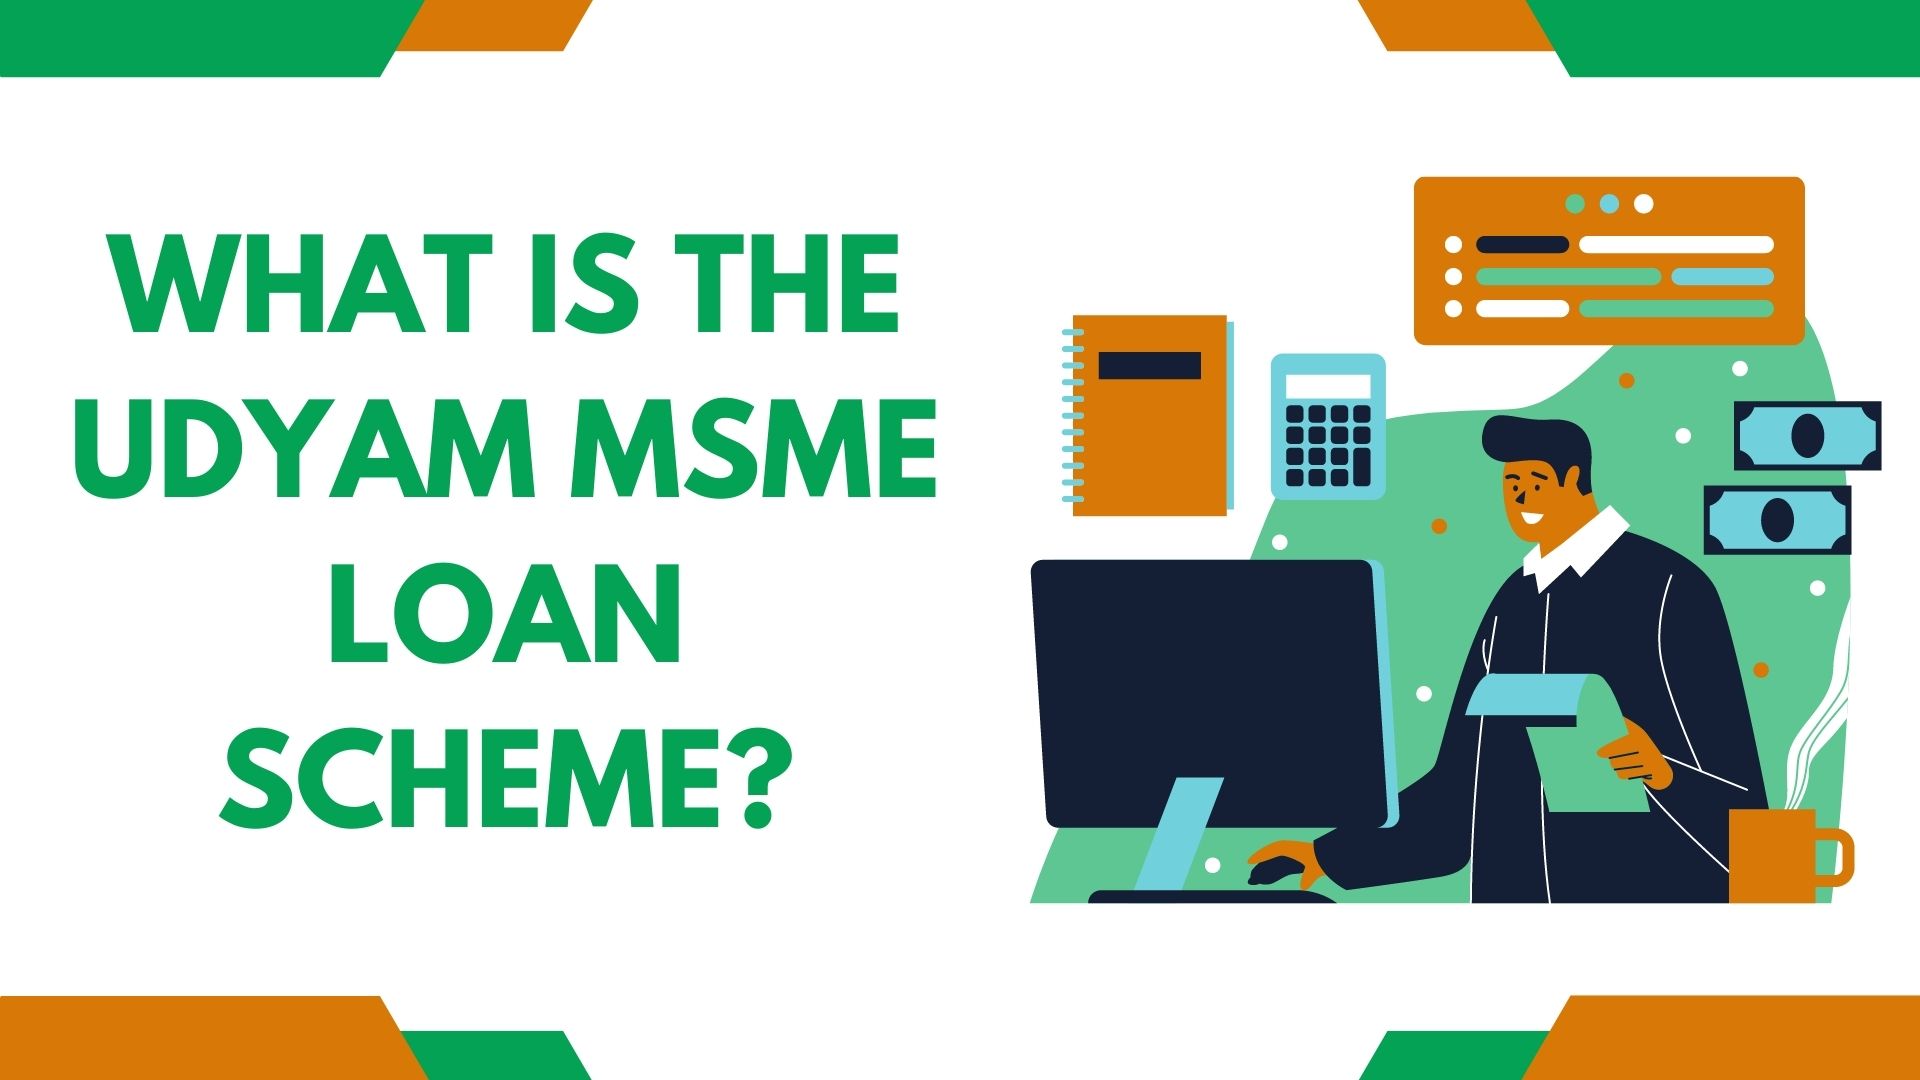 What is the Udyam MSME Loan Scheme